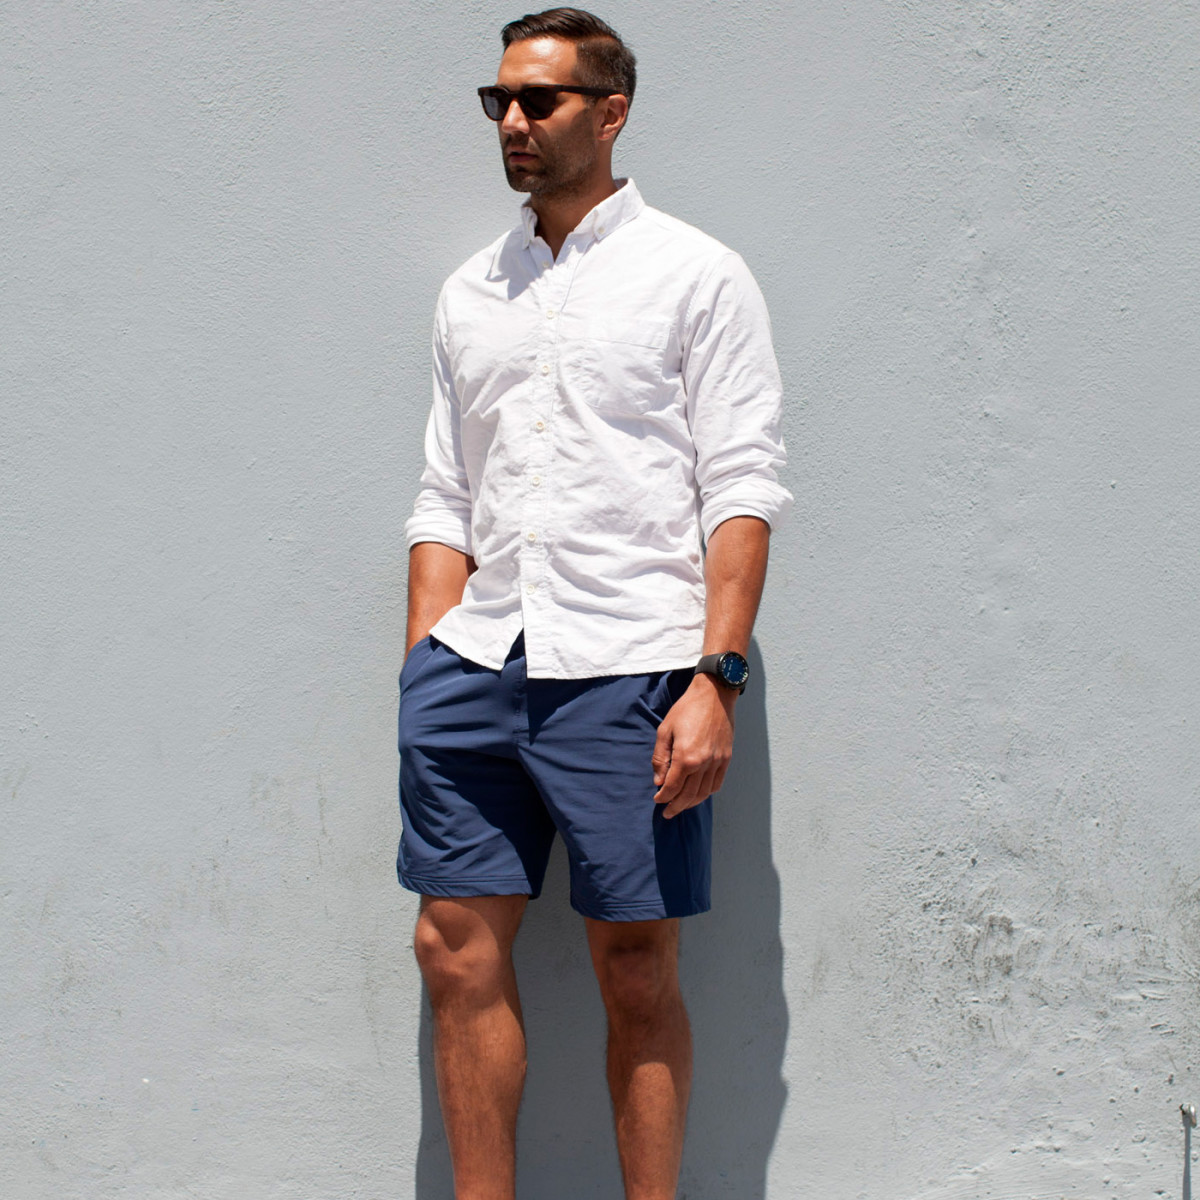 Shorts that are stylish and functional